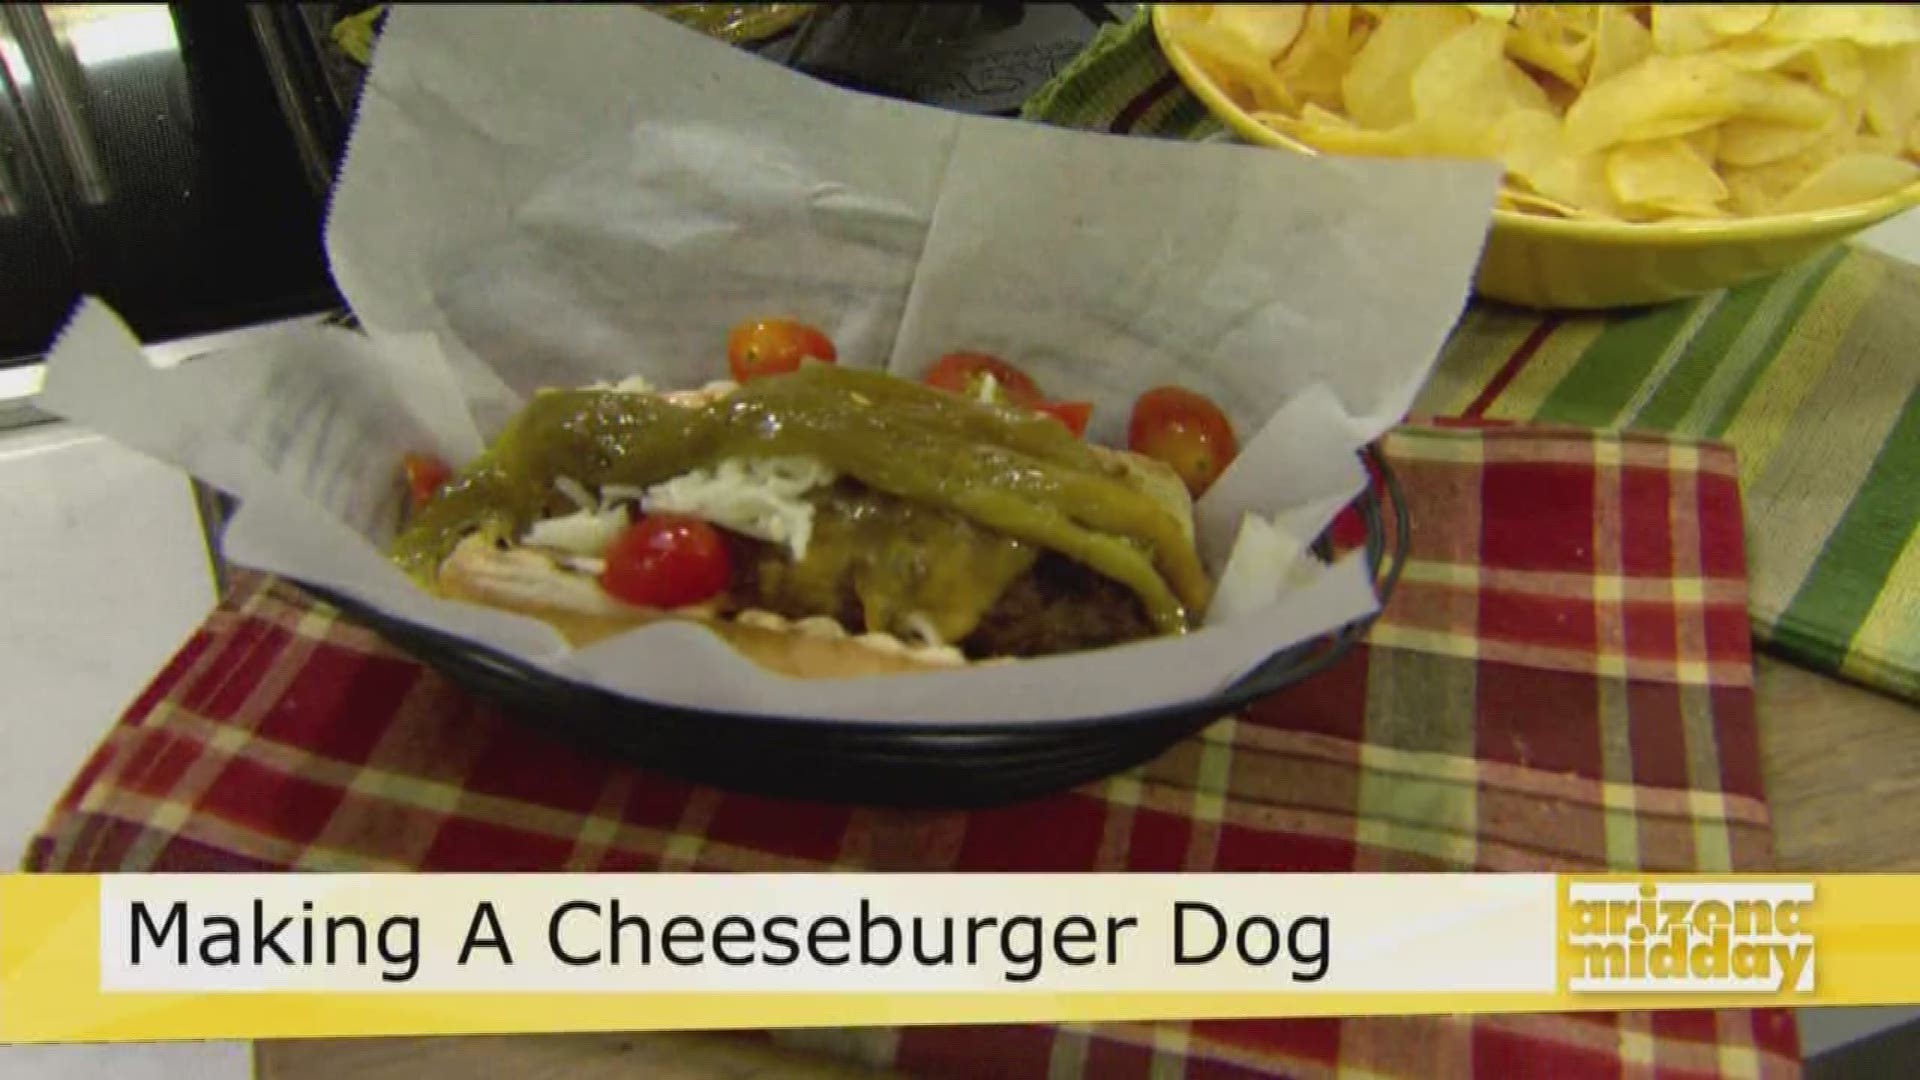 Learn how to put a tasty twist on your traditional cheeseburger.